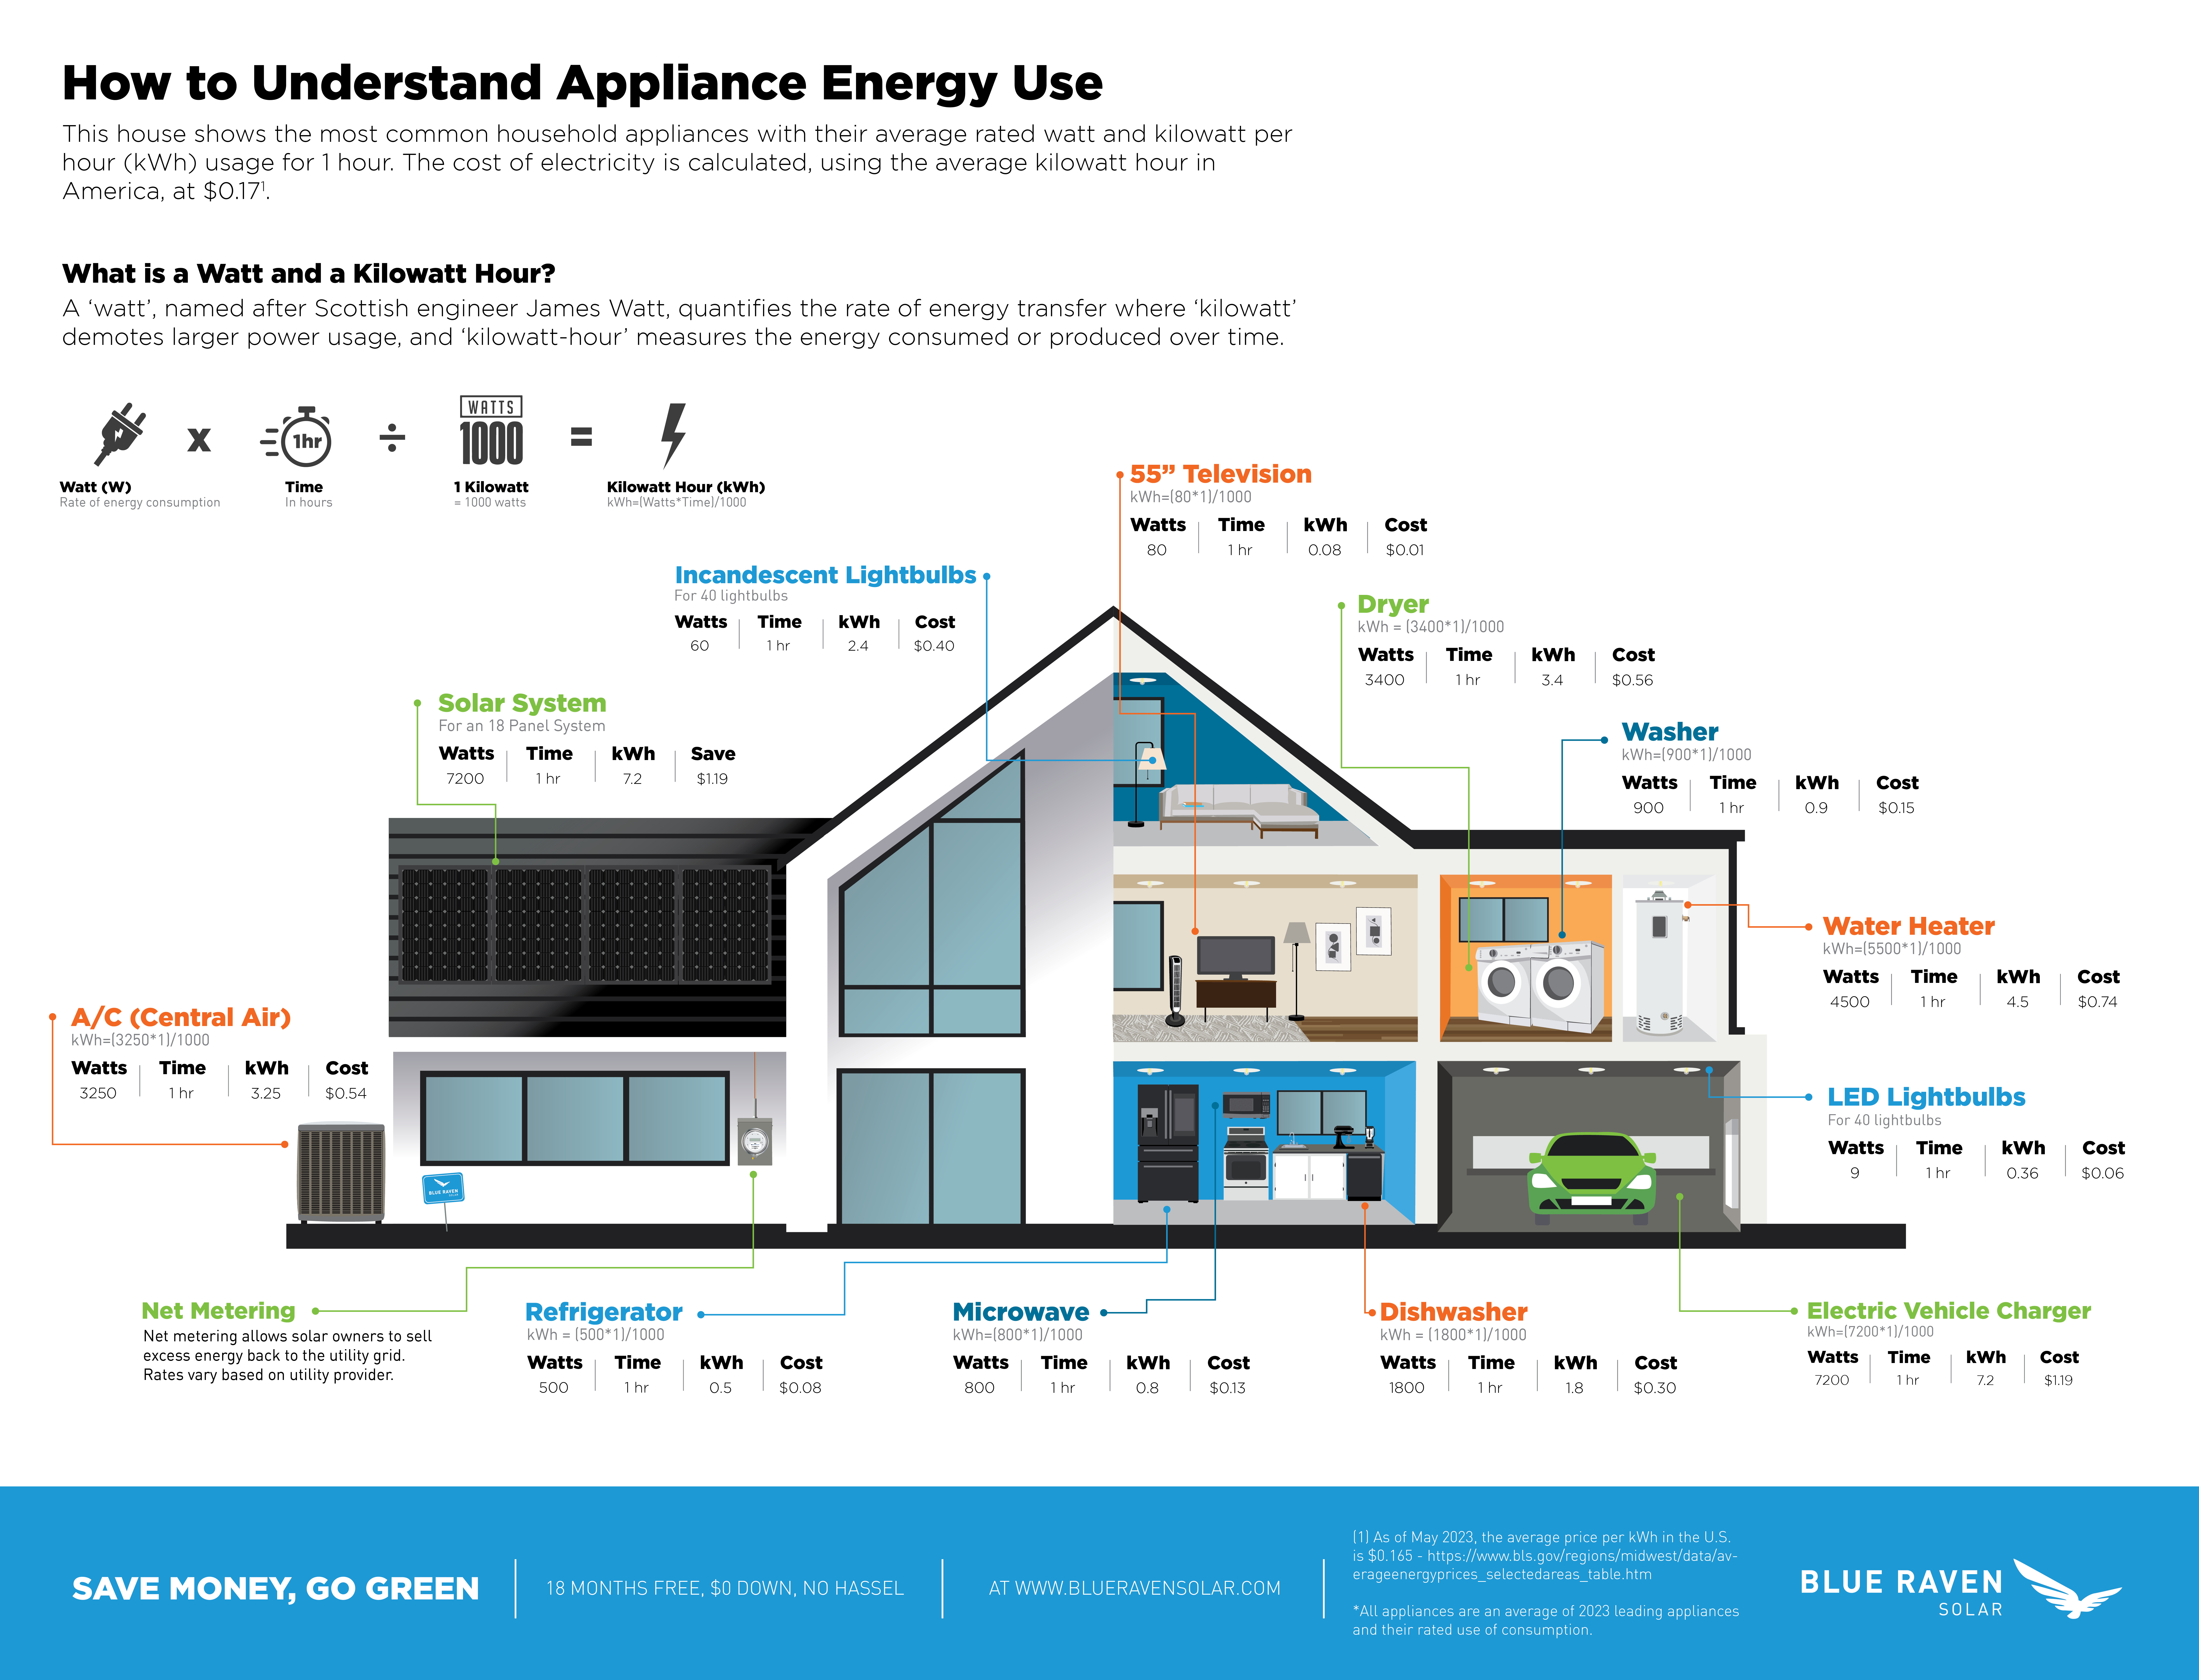 Infographic illustrating common household appliances and how much energy they use if running for 1 hour